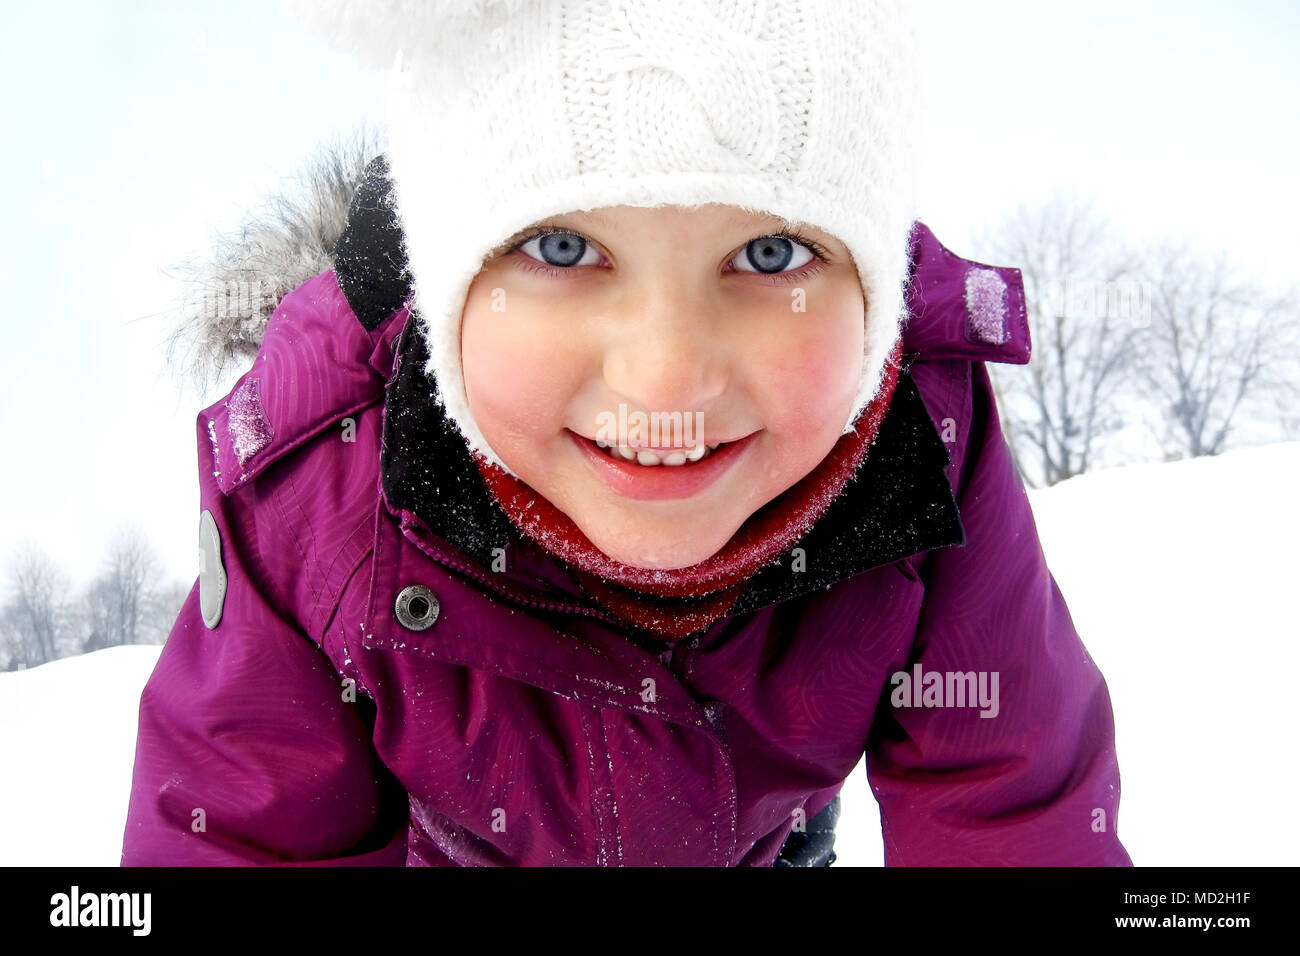 Baby girl having fun in the snow on a winter background. Stock Photo